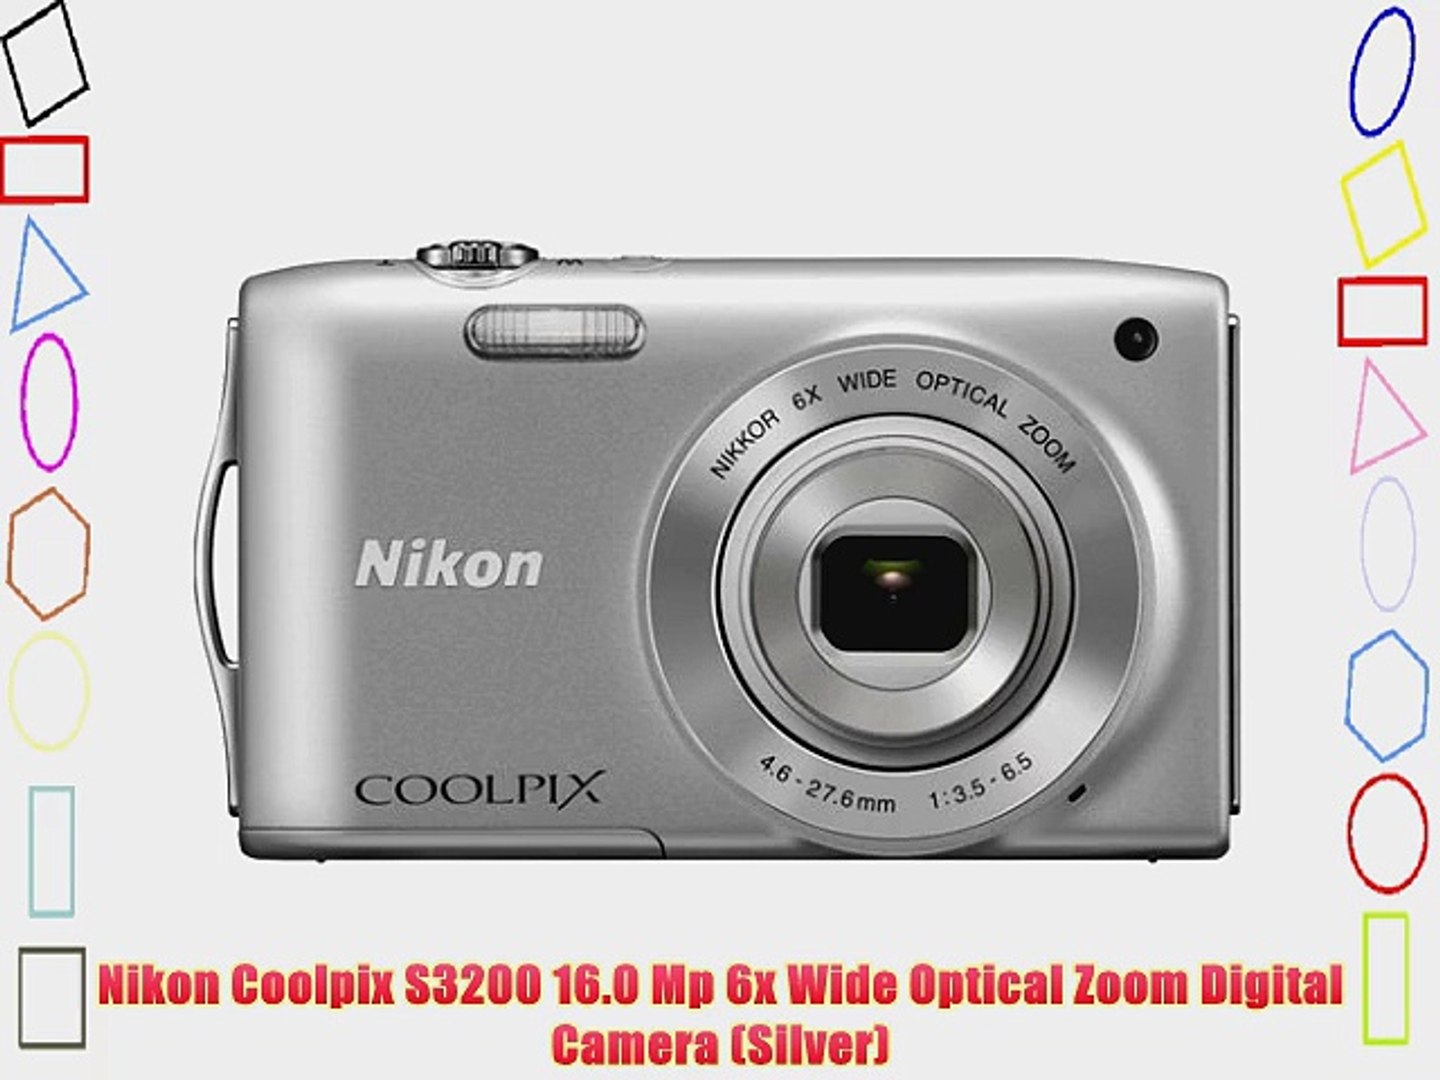 Nikon Coolpix S3200 16.0 Mp 6x Wide Optical Zoom Digital Camera (Silver) -  video Dailymotion